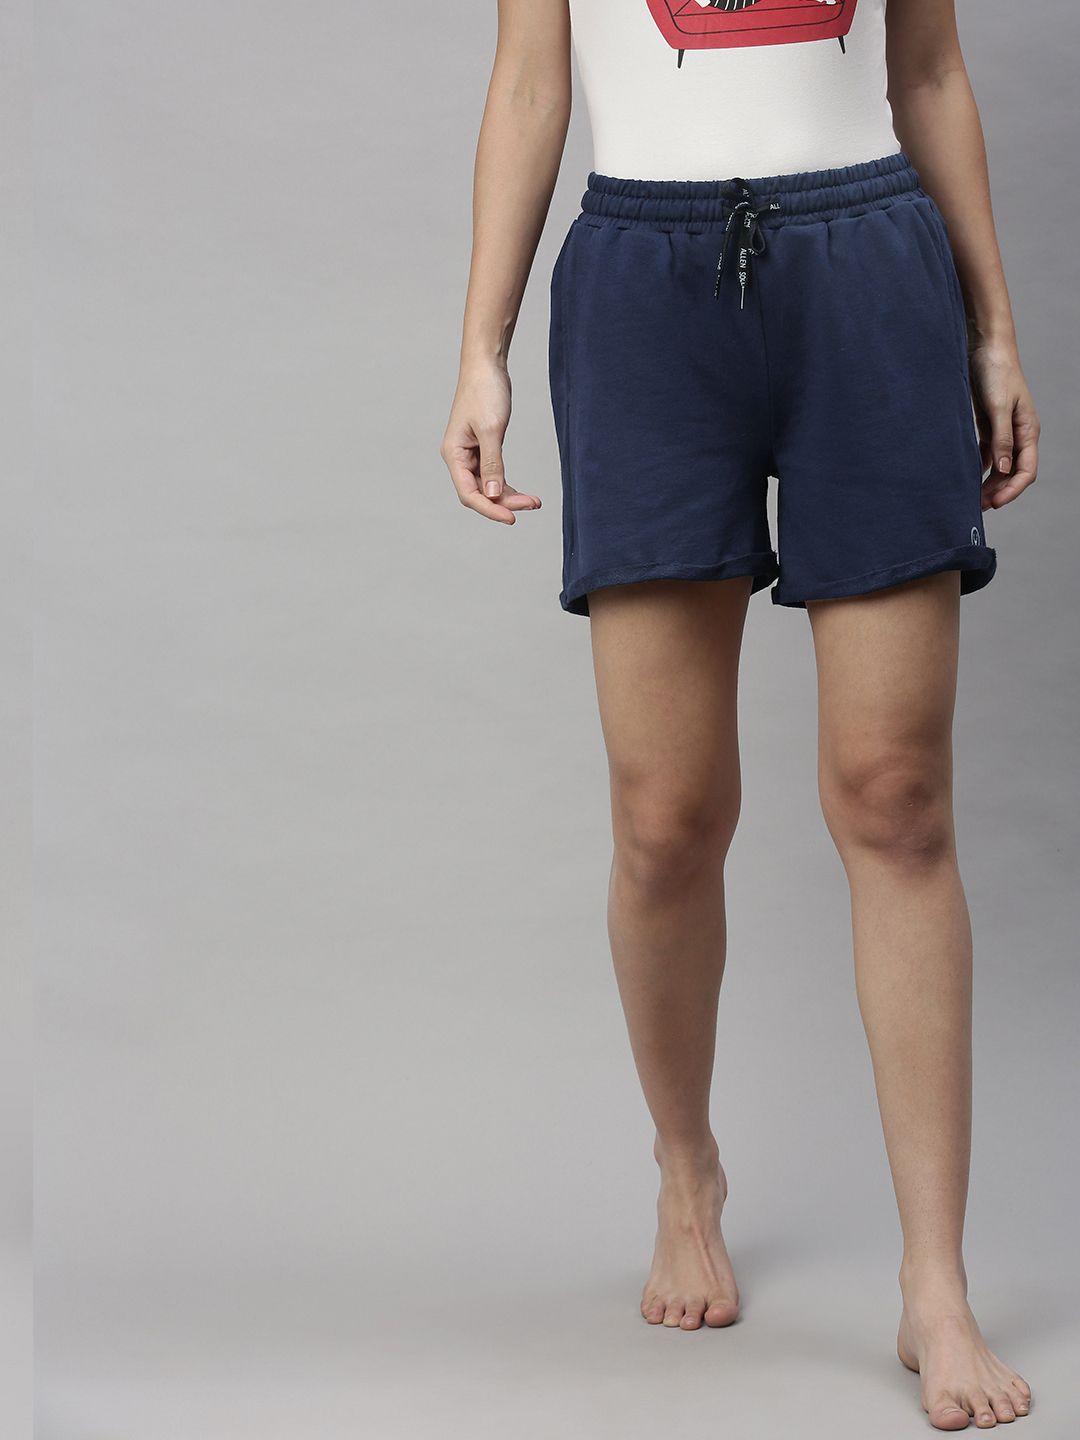 allen solly woman navy blue solid pure cotton lounge shorts